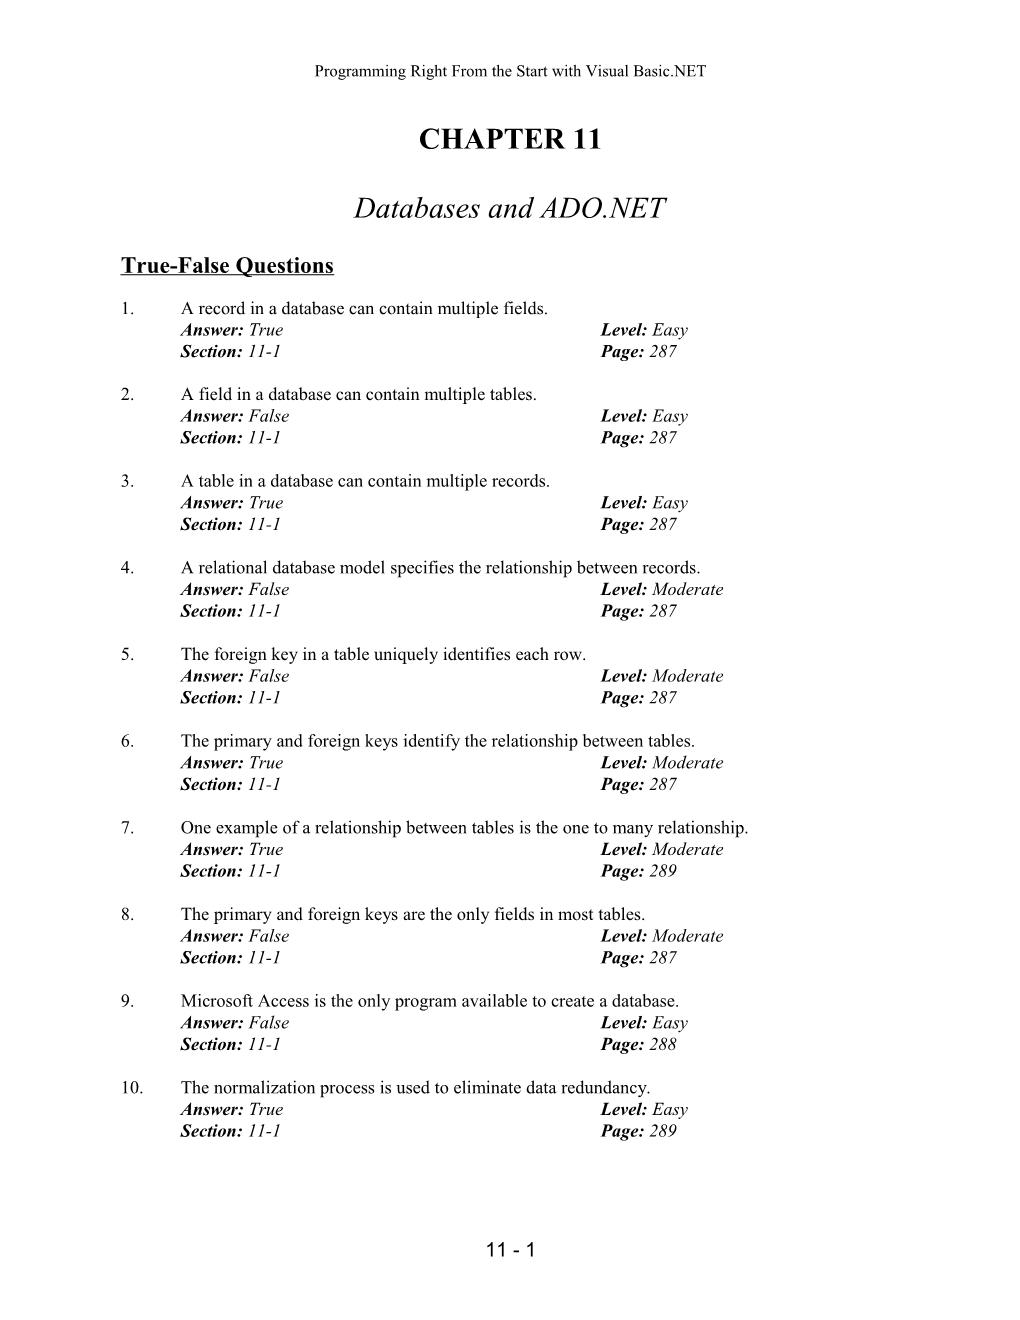 Chapter 11 Databases and ADO.NET